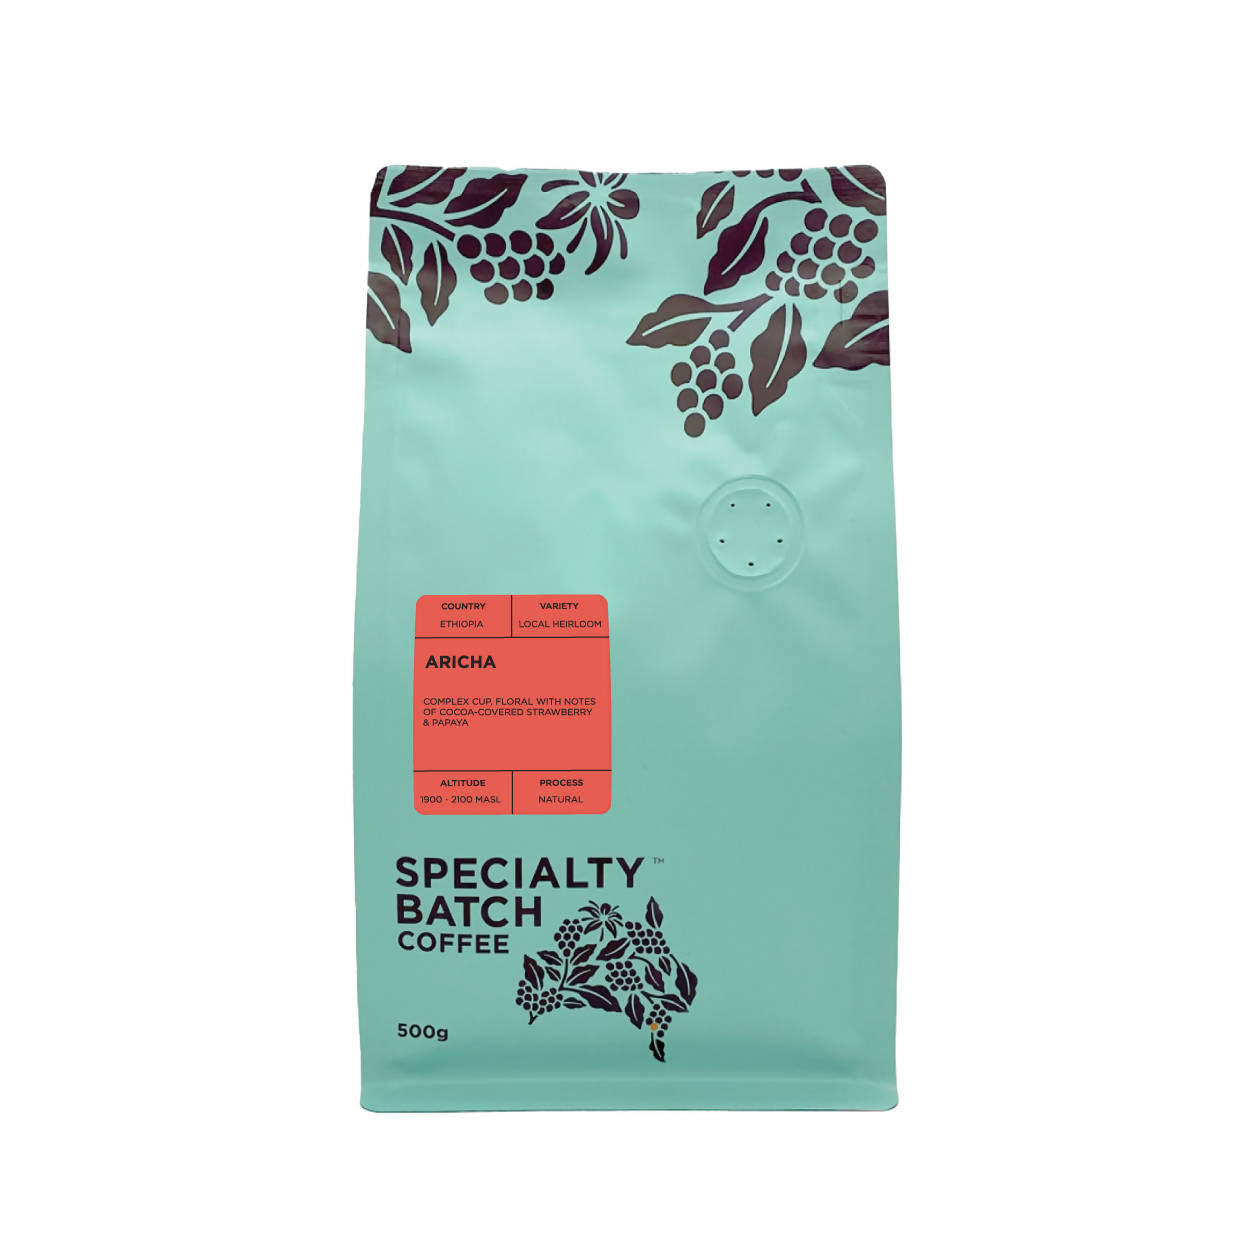 Ethiopia Aricha - Filter - BeanBurds SPECIALTY BATCH COFFEE 500g ( 20 - 24 cups) / Whole Beans